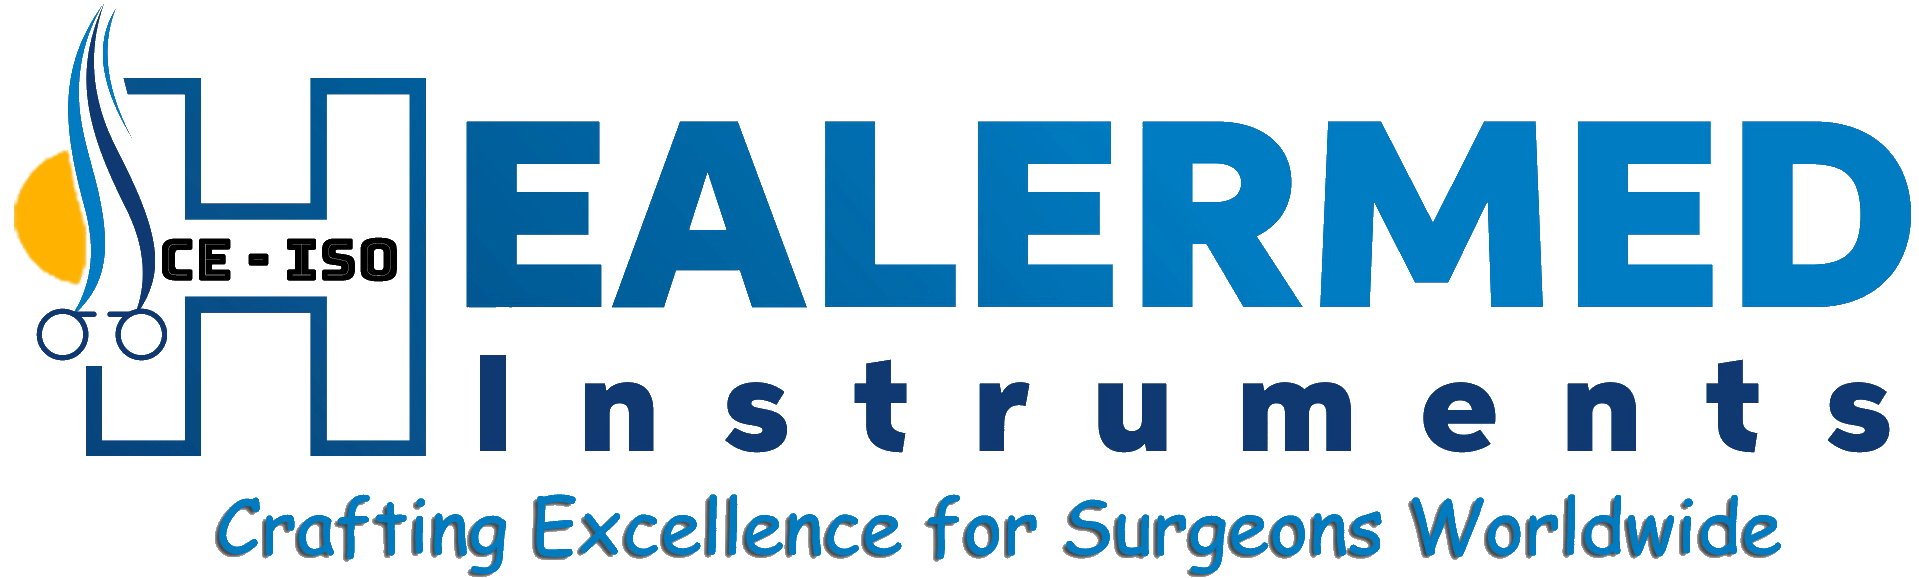 All Surgical inc. Plastic surgery instruments by Healermed